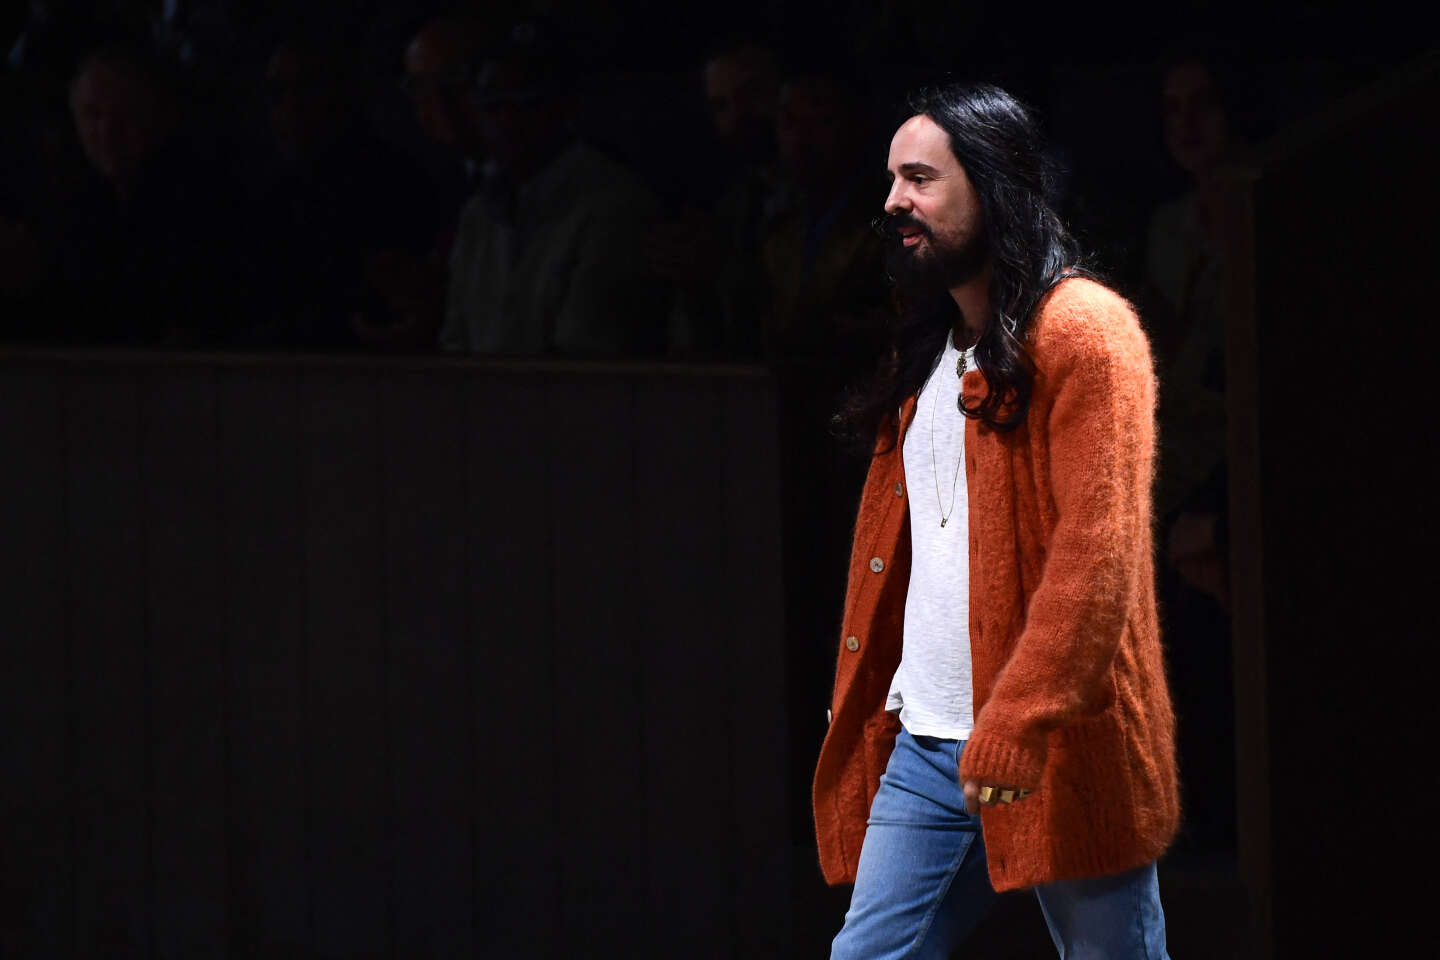 Alessandro Michele steps down as Gucci creative director